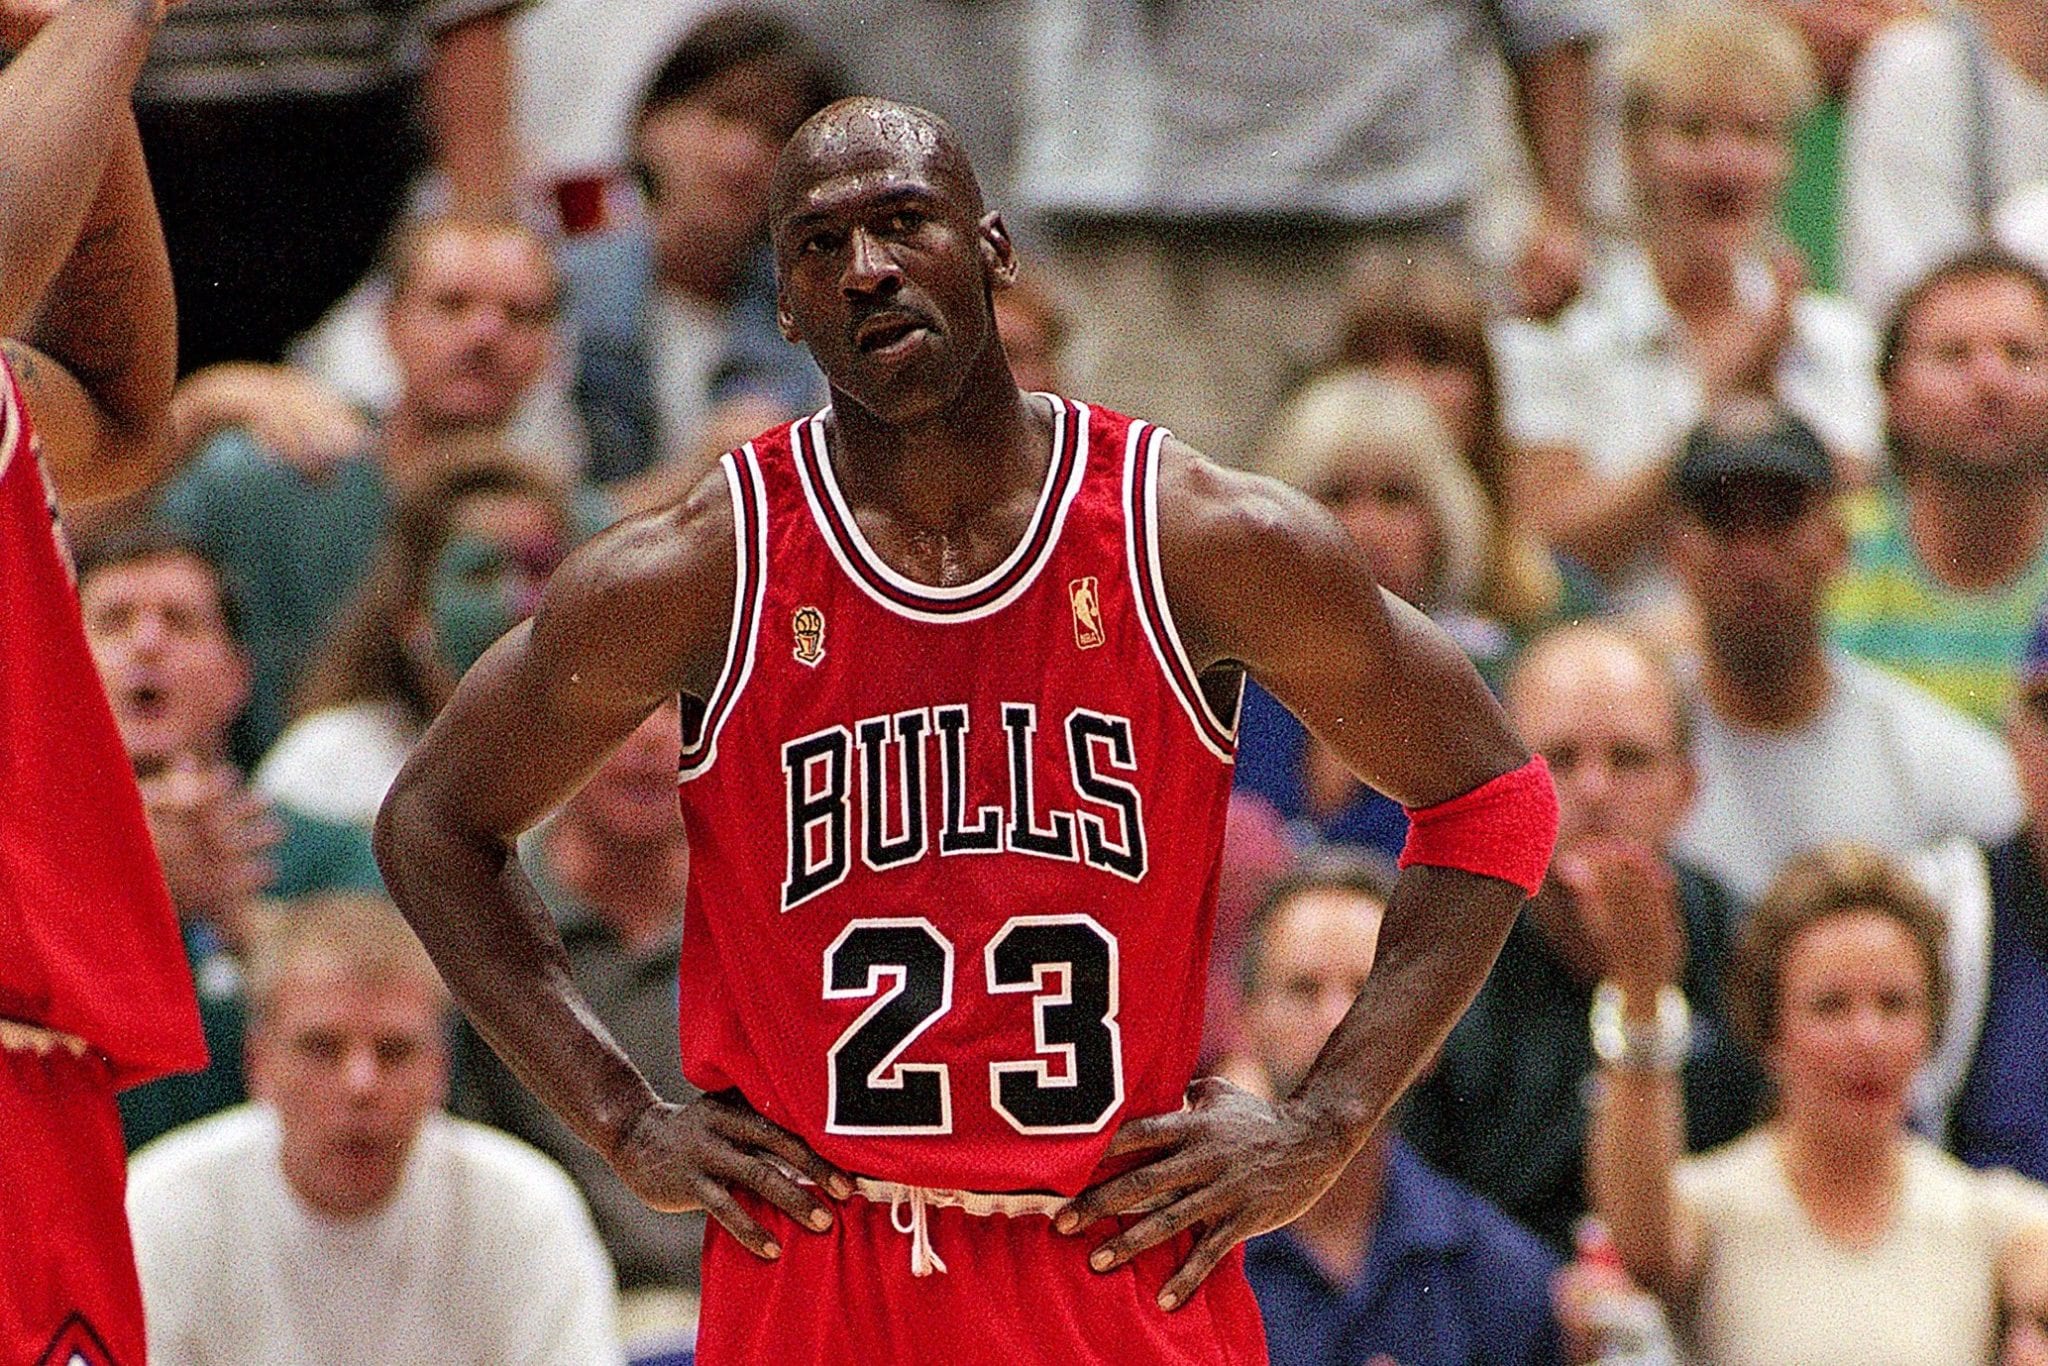 Michael Jordan Wasn’t Poisoned By Pizza, Says Man Who Claims He Made It